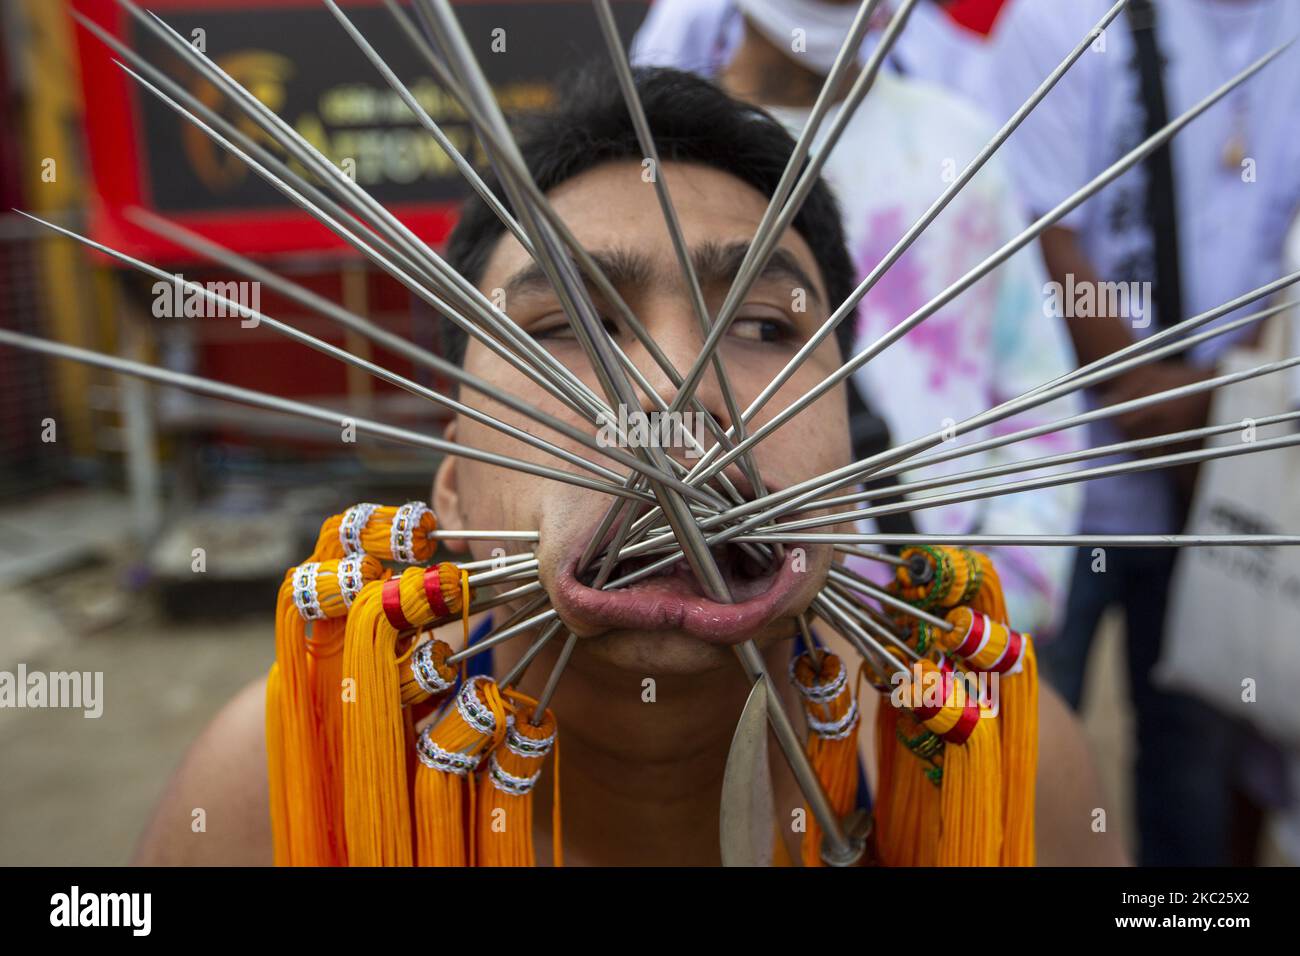 (EDITORS NOTE: Image contains graphic content.) Thai devotees are possessed by spirits and pierced with long needles during a Vegetarian ritual at the Sapam Shrine on October 19, 2020 in Phuket, Thailand. The annual Phuket vegetarian Festival will be held from October 17th to 25th. Also known as the Nine Emperor Gods Festival, devotees participating in the festival abstain from eating meat, drinking alcohol, and there to other requirements during the duration of the festival. Spirit mediums known as man song are believed to become possessed with benevolent spirits, going into a trace and takin Stock Photo